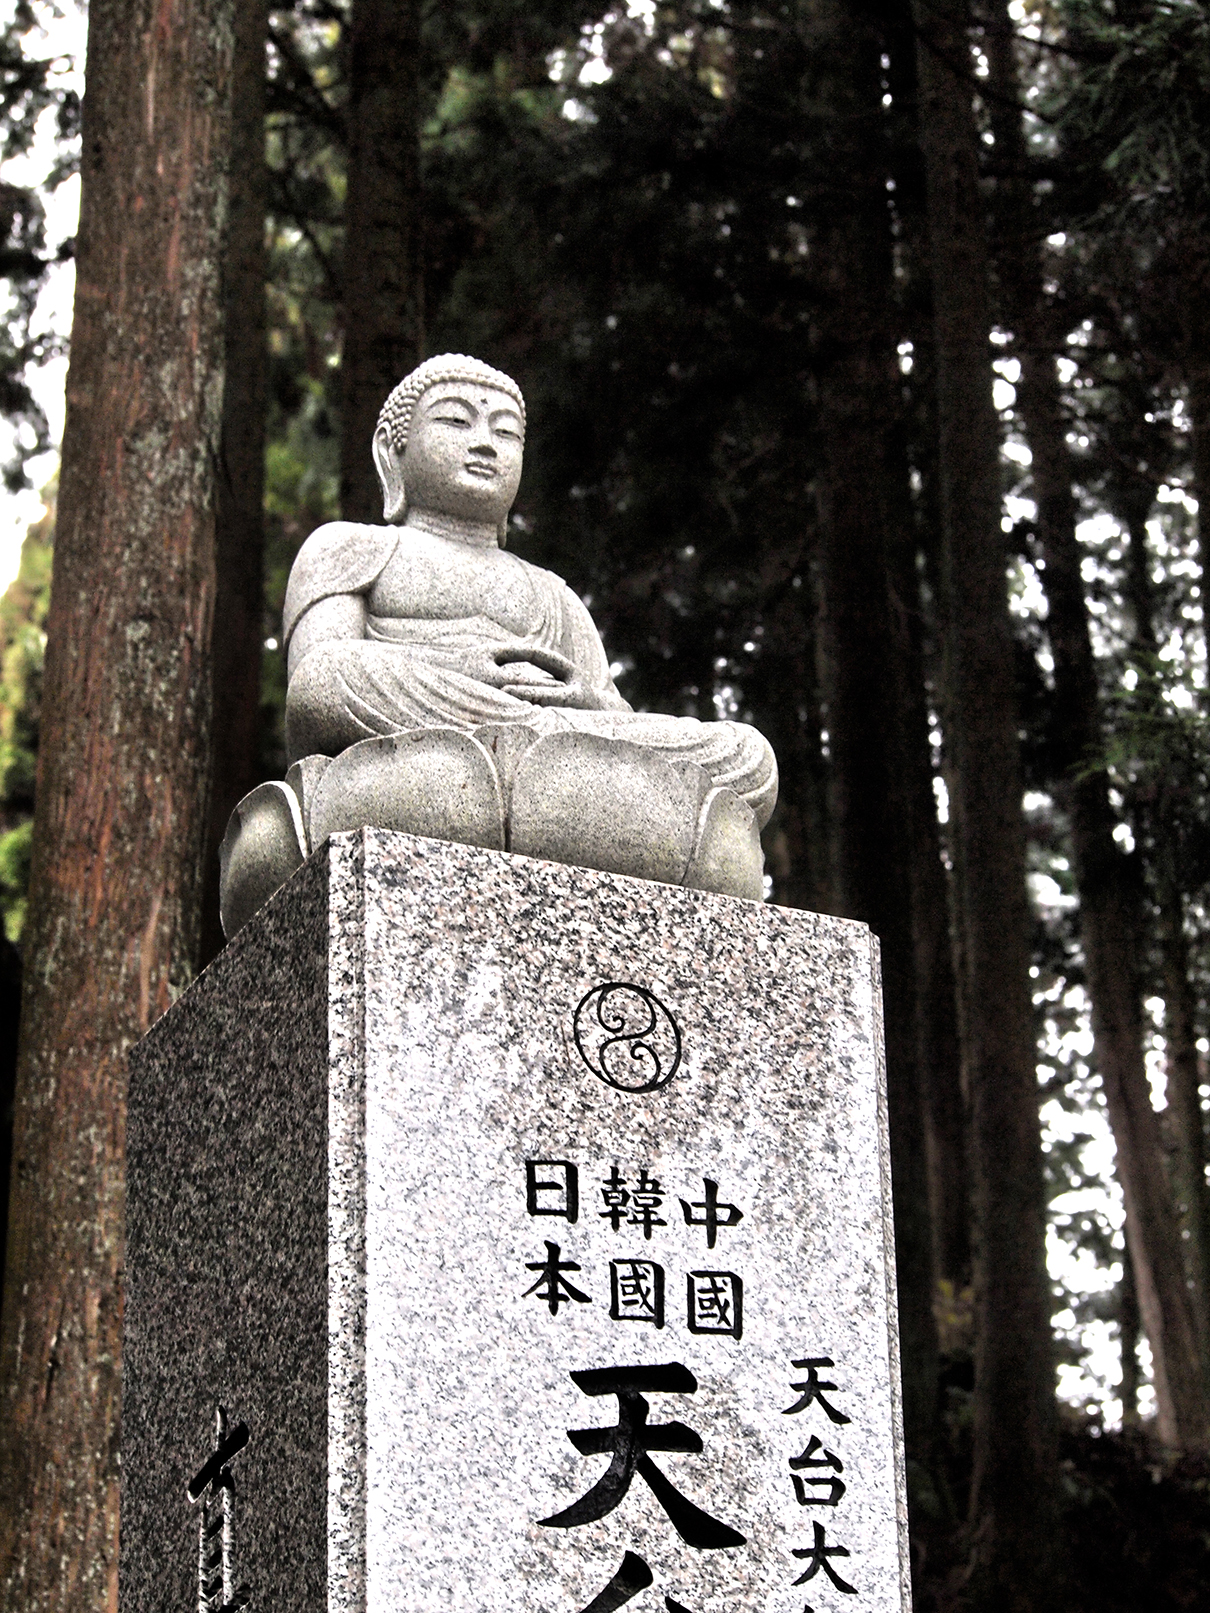 A buddhist statue. The characters showing 中國 韓國 and 日本 which means &lsquo;China&rsquo;, &lsquo;Korea&rsquo; and &lsquo;Japan&rsquo;.